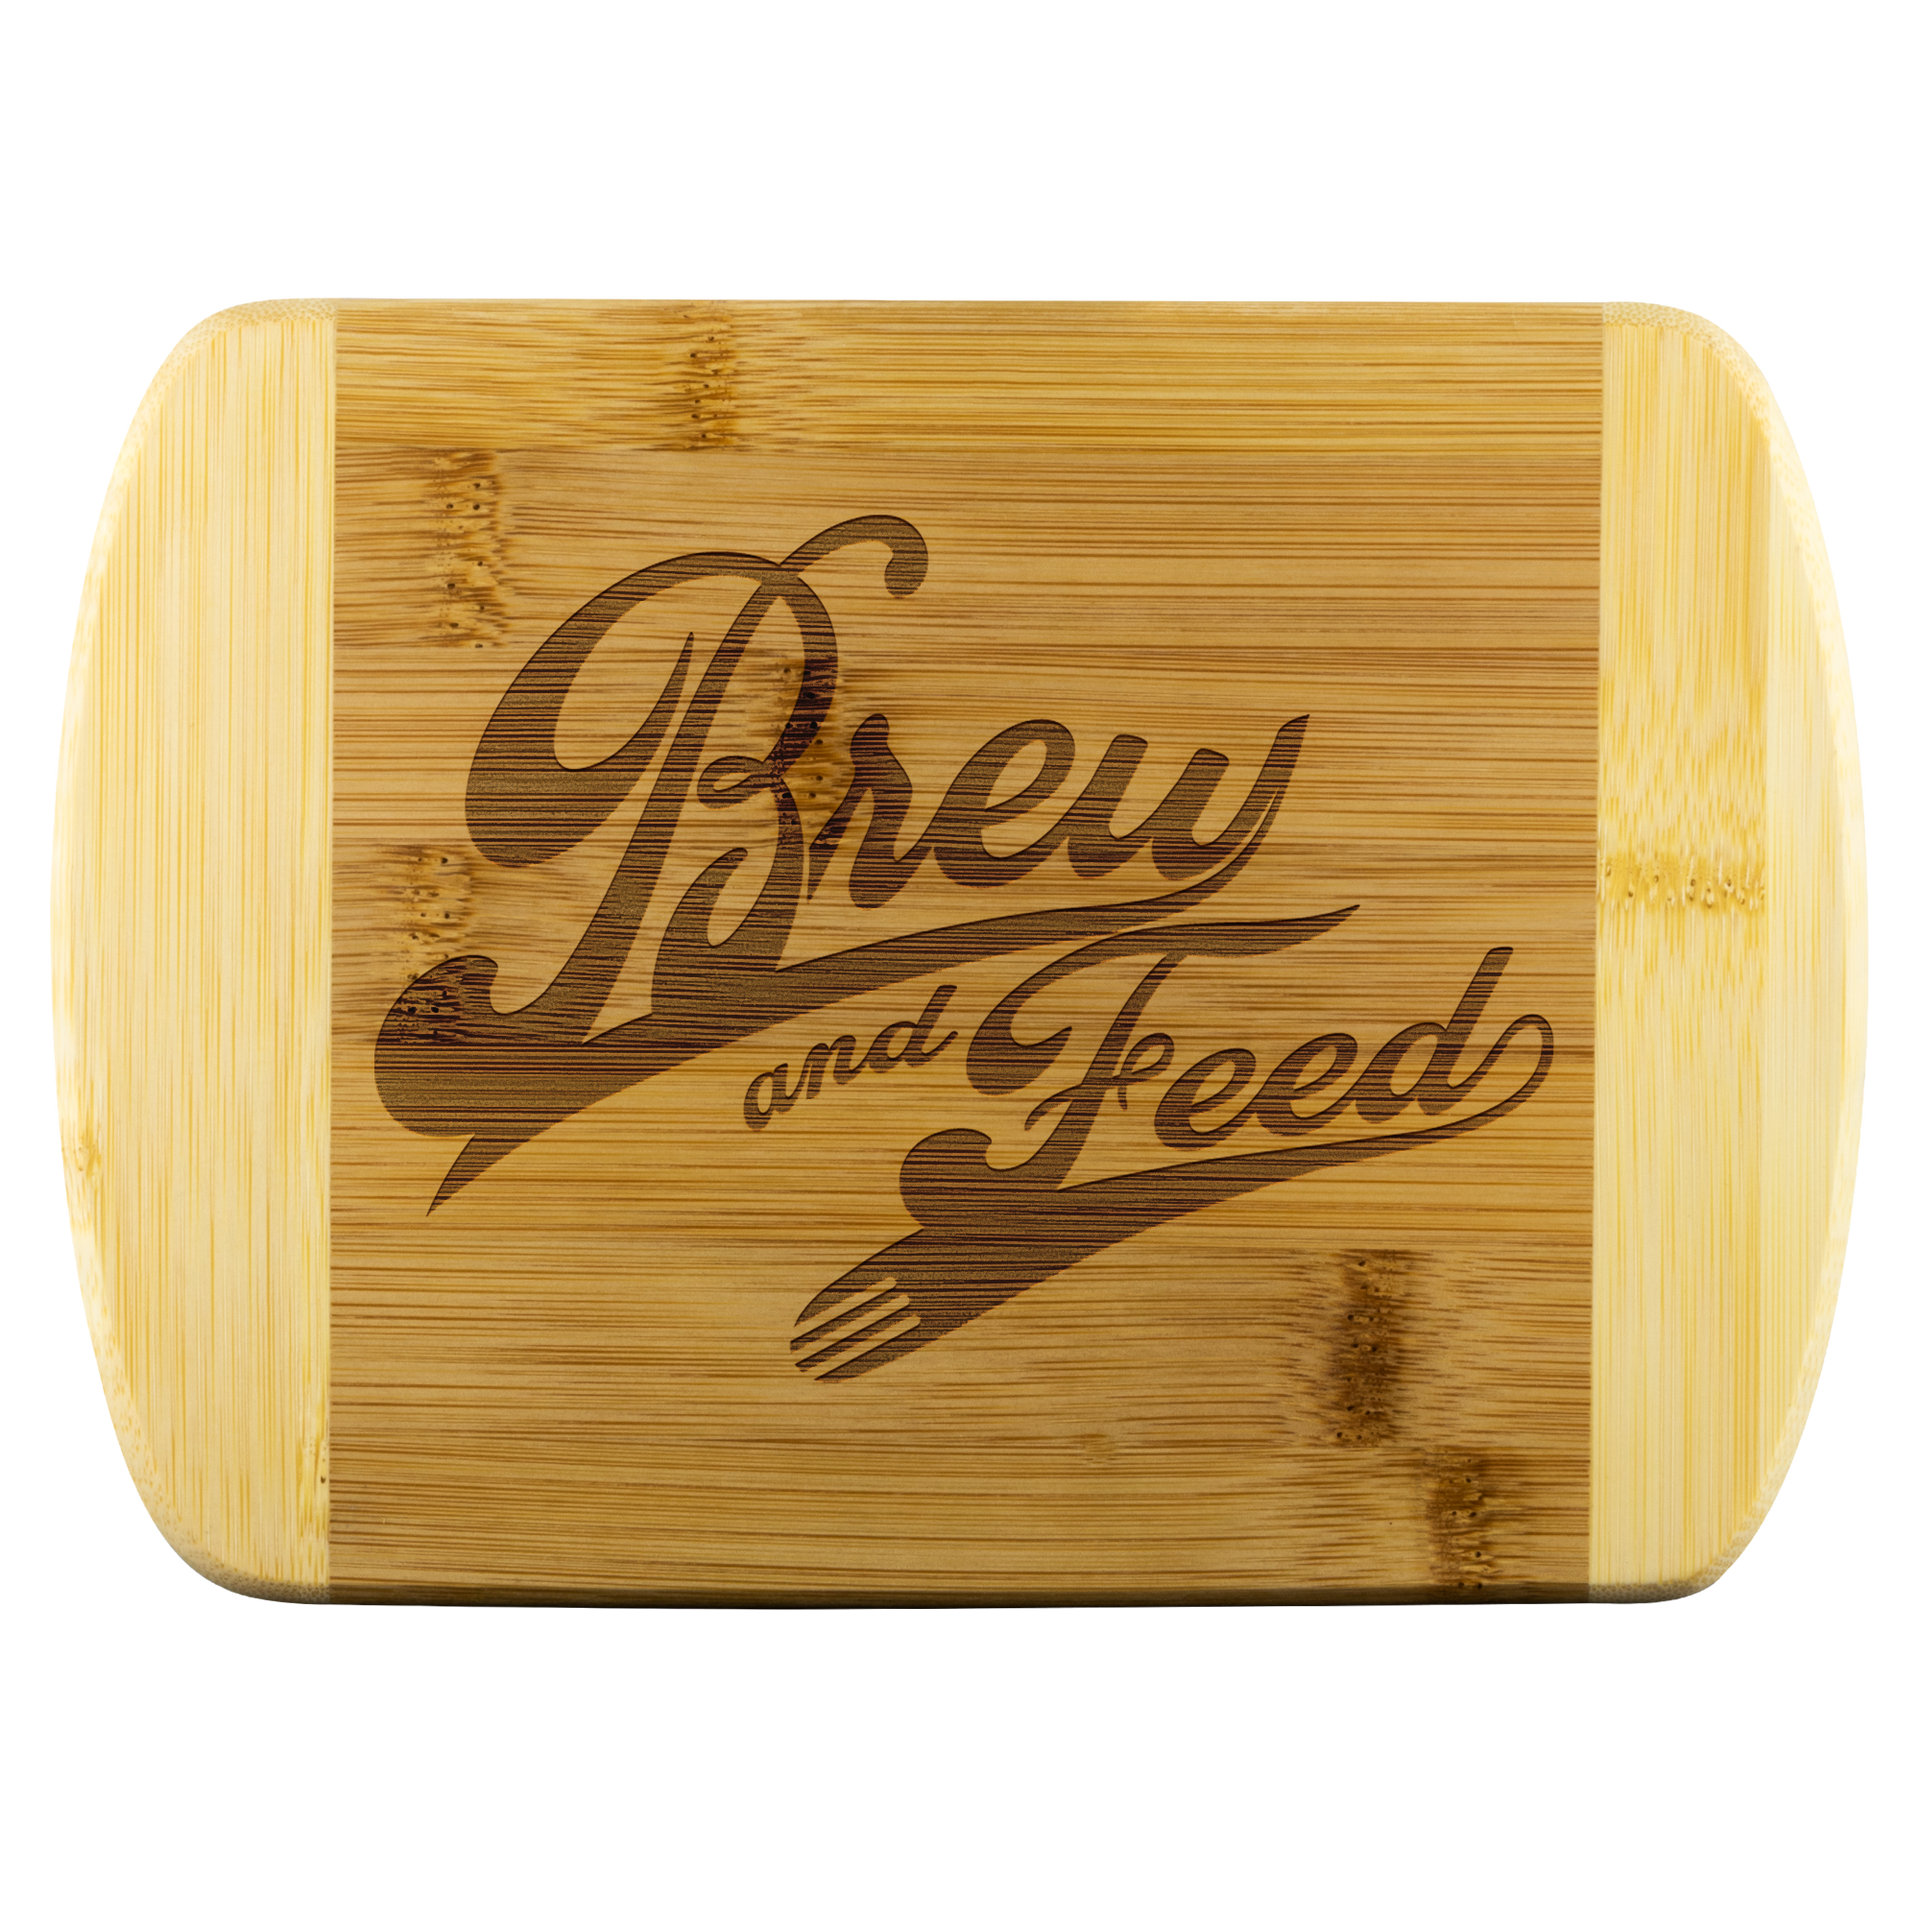 Brew and Feed Cutting and Charcuterie/Cheese Board - Small - 8"x5.75" - Large" - 11"x8.5"